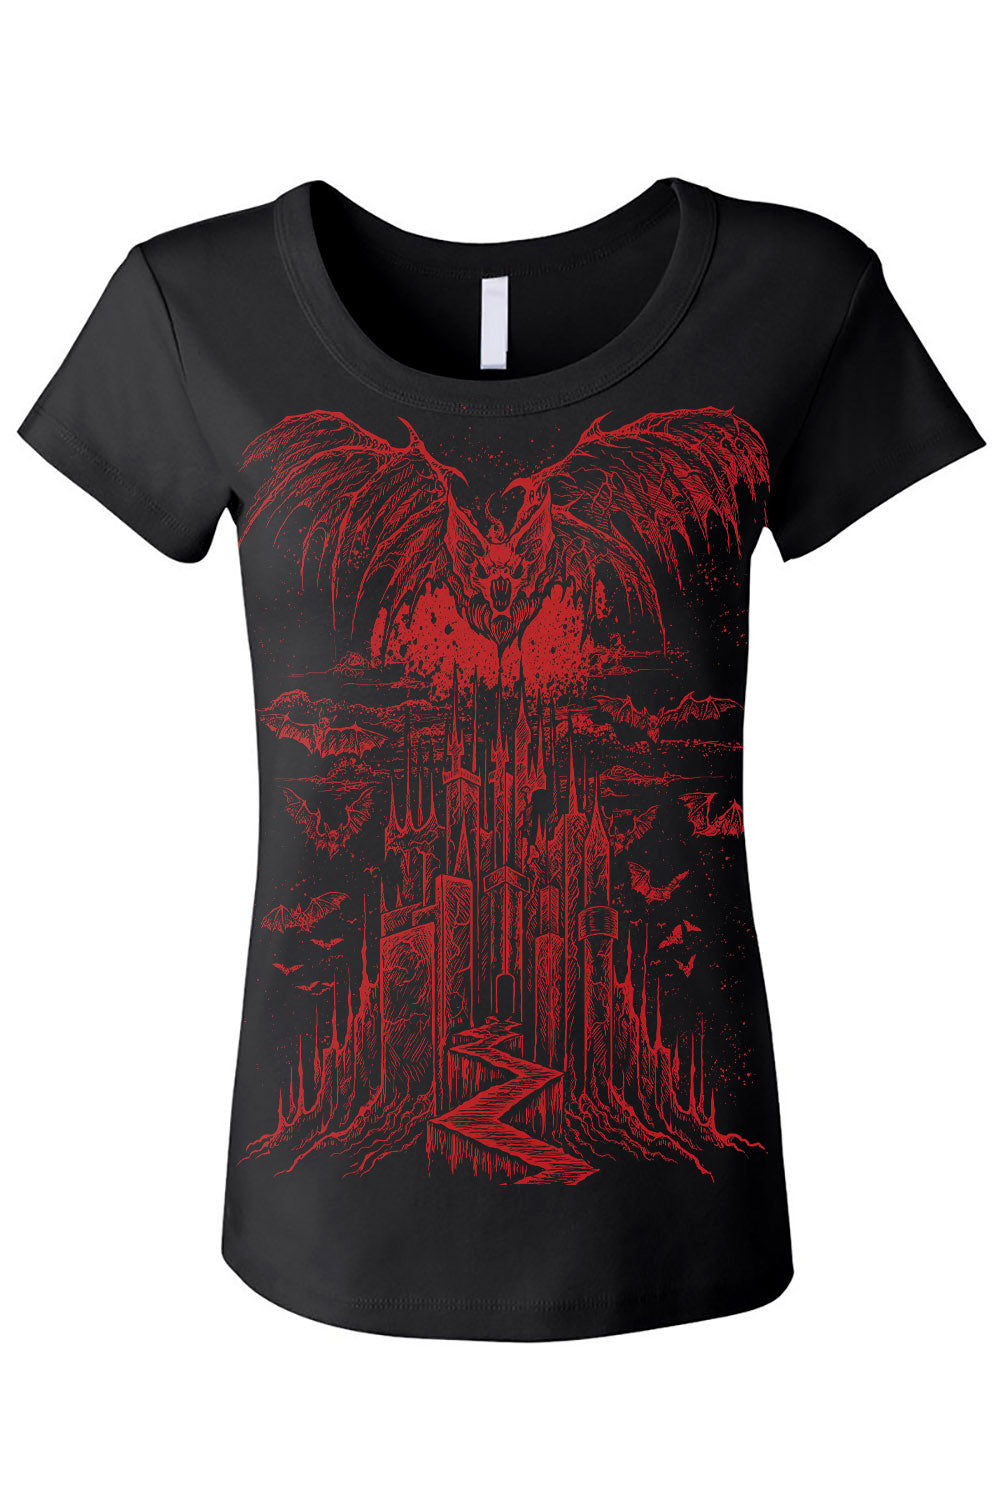 Vampire Castle Tee [BLOOD RED] [Multiple Styles Available]